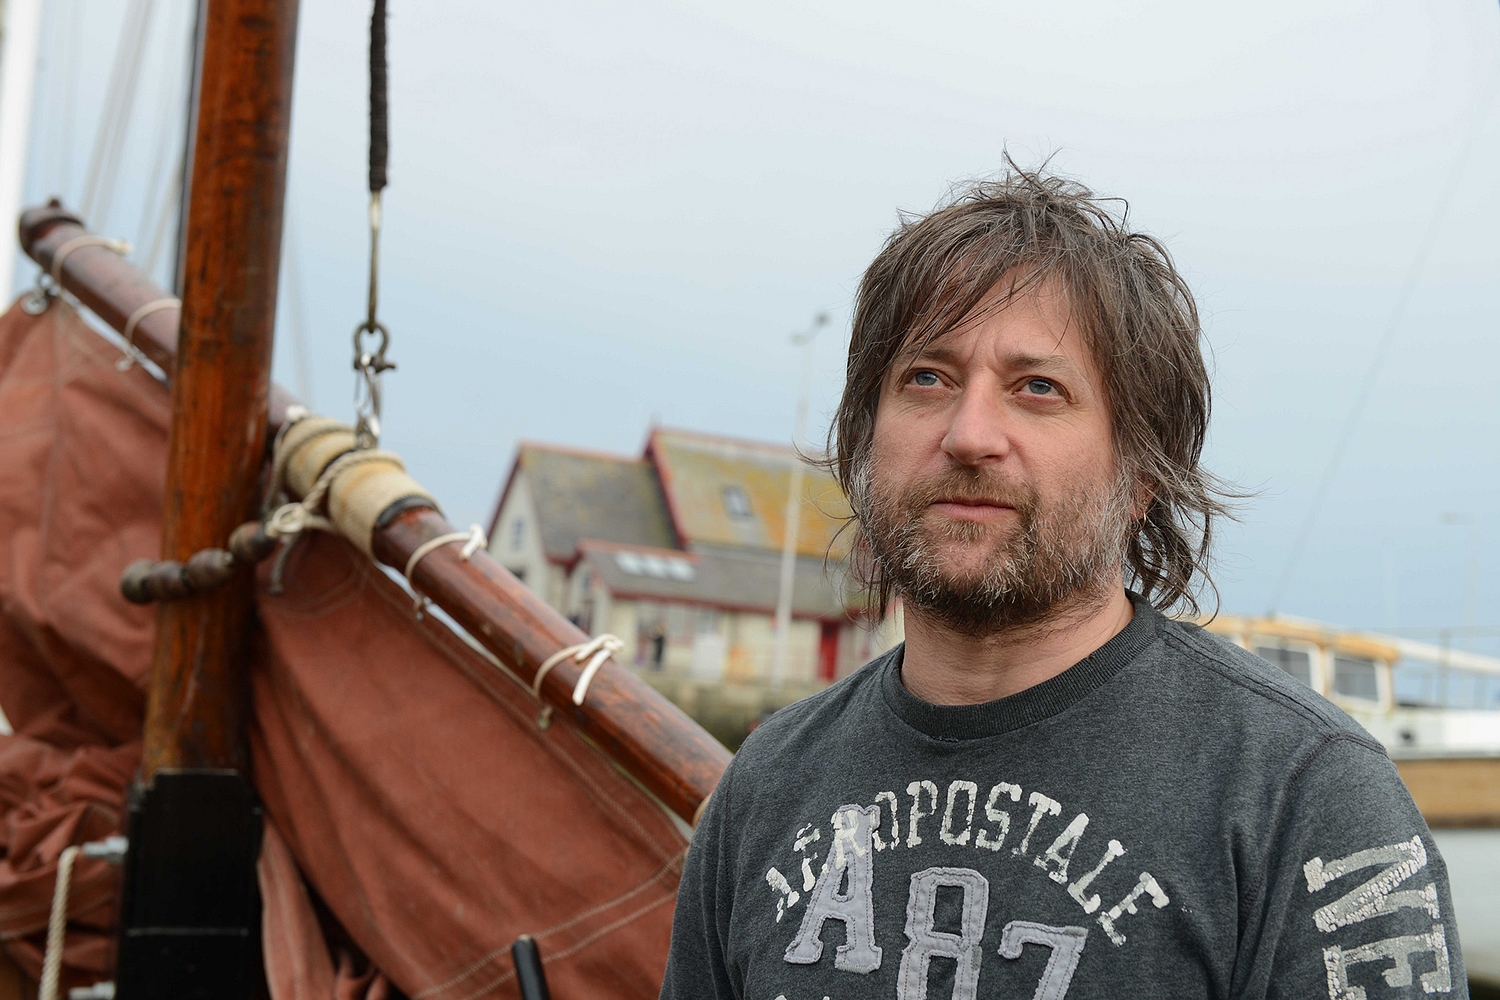 King Creosote: "Life in Scotland is pretty good"